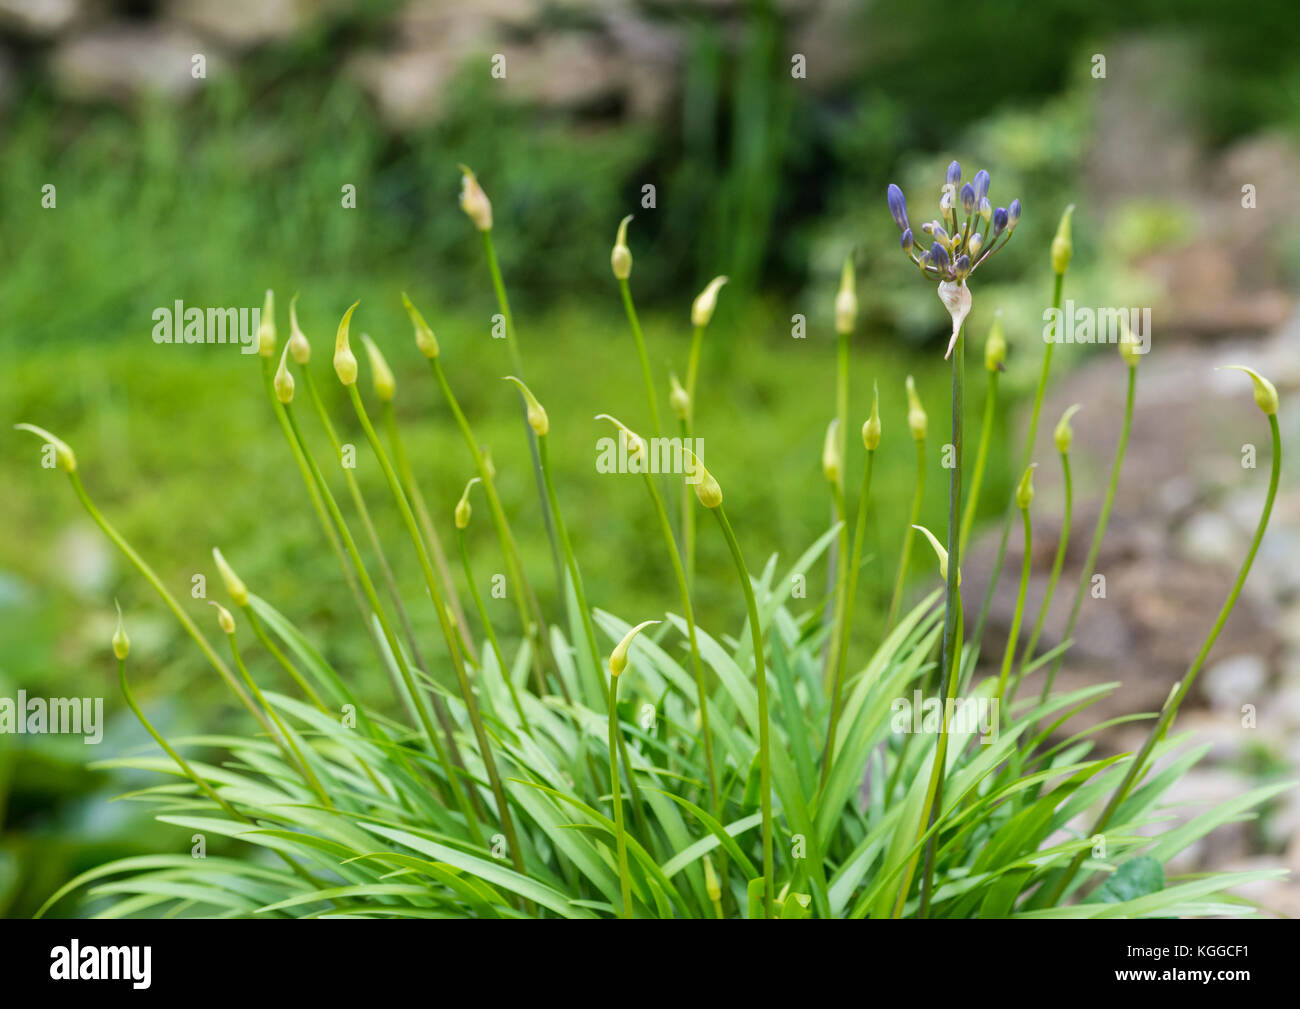 A shot of lots of agapanthus flower buds eminating from one plant. Stock Photo